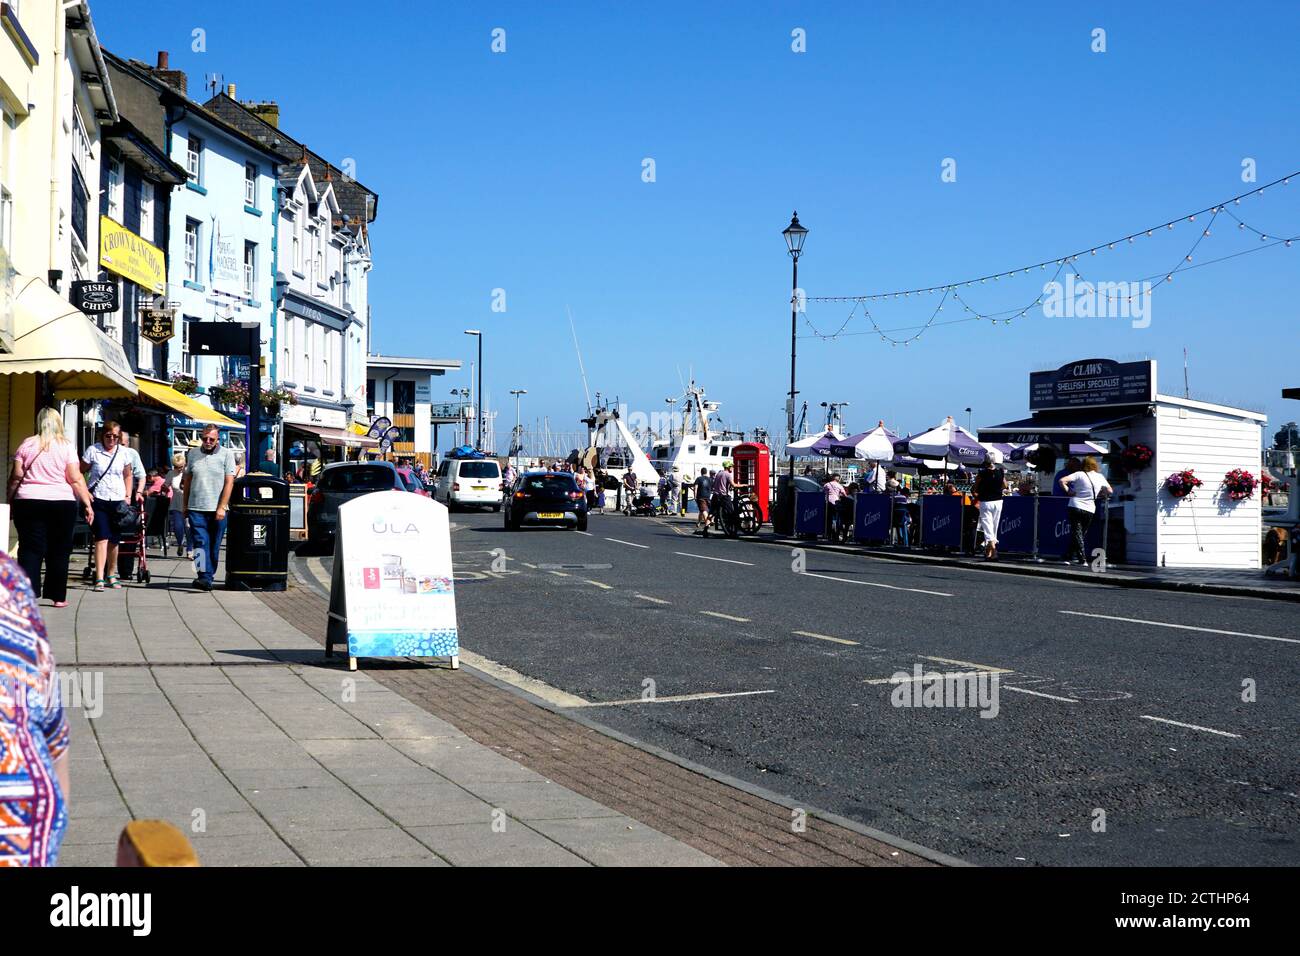 Brixham, Devon, UK. September 14, 2020. Tourists and holidaymakers enjoying the quayside and harbour at Brixham in Devon, UK. Stock Photo